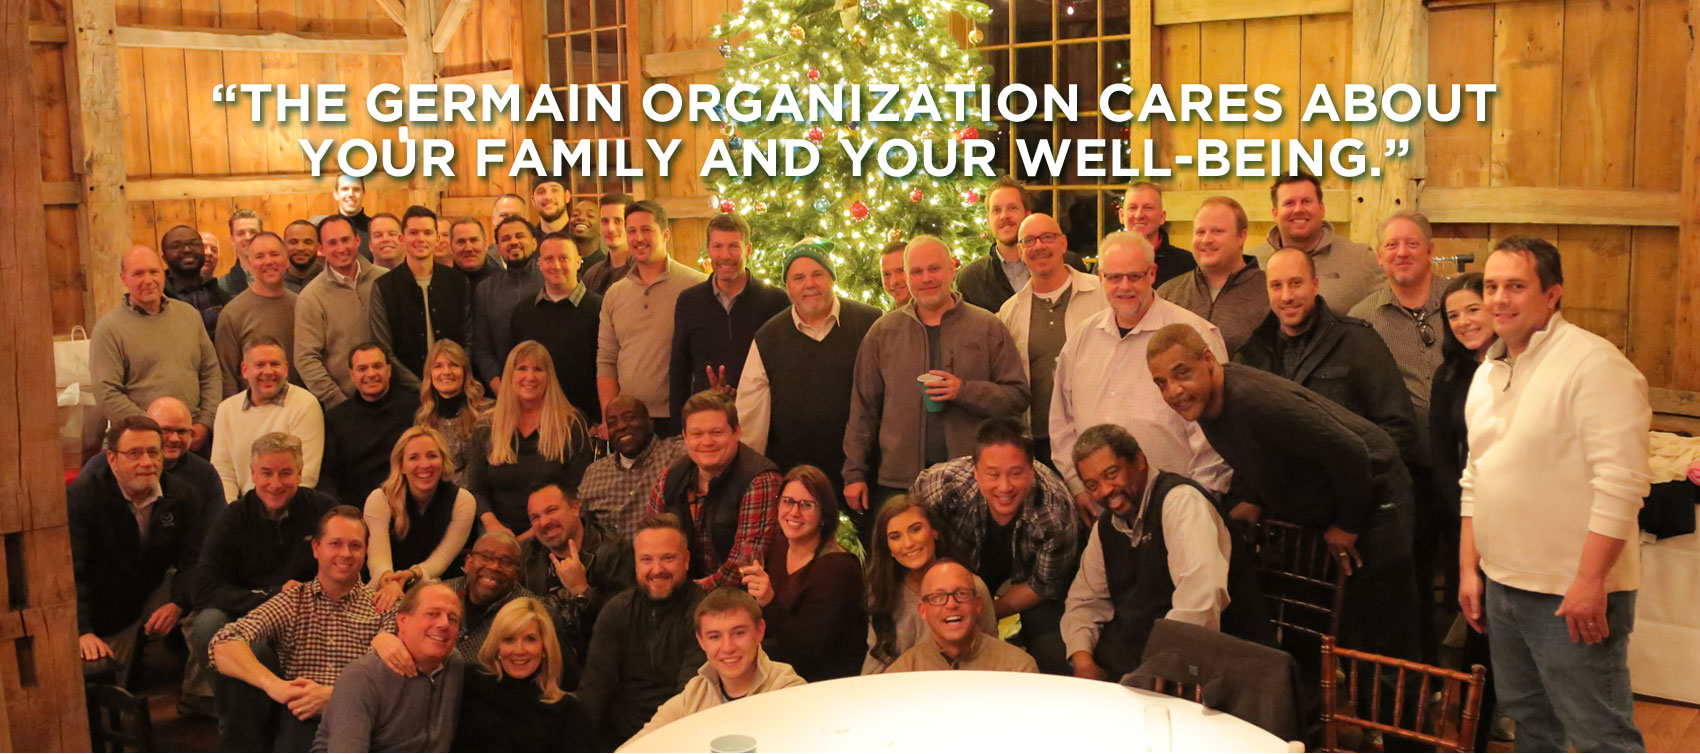 The Germain organization cares about your family and your well-being.